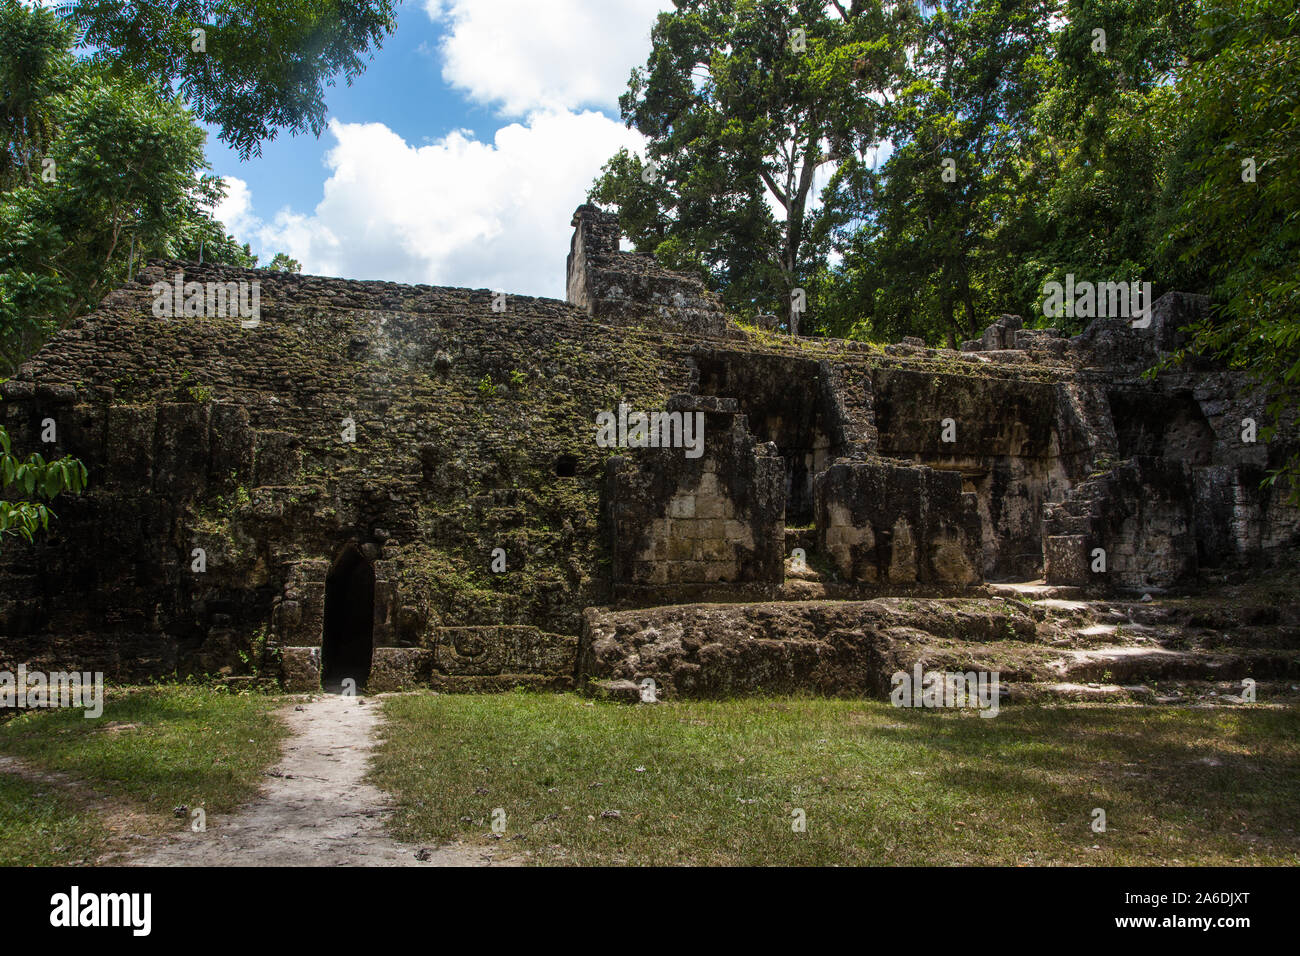 Ruins of a palace in Group G of the archeological site of the ancient Mayan culture in Tikal National Park, Guatemala.  UNESCO World Heritage site. Stock Photo